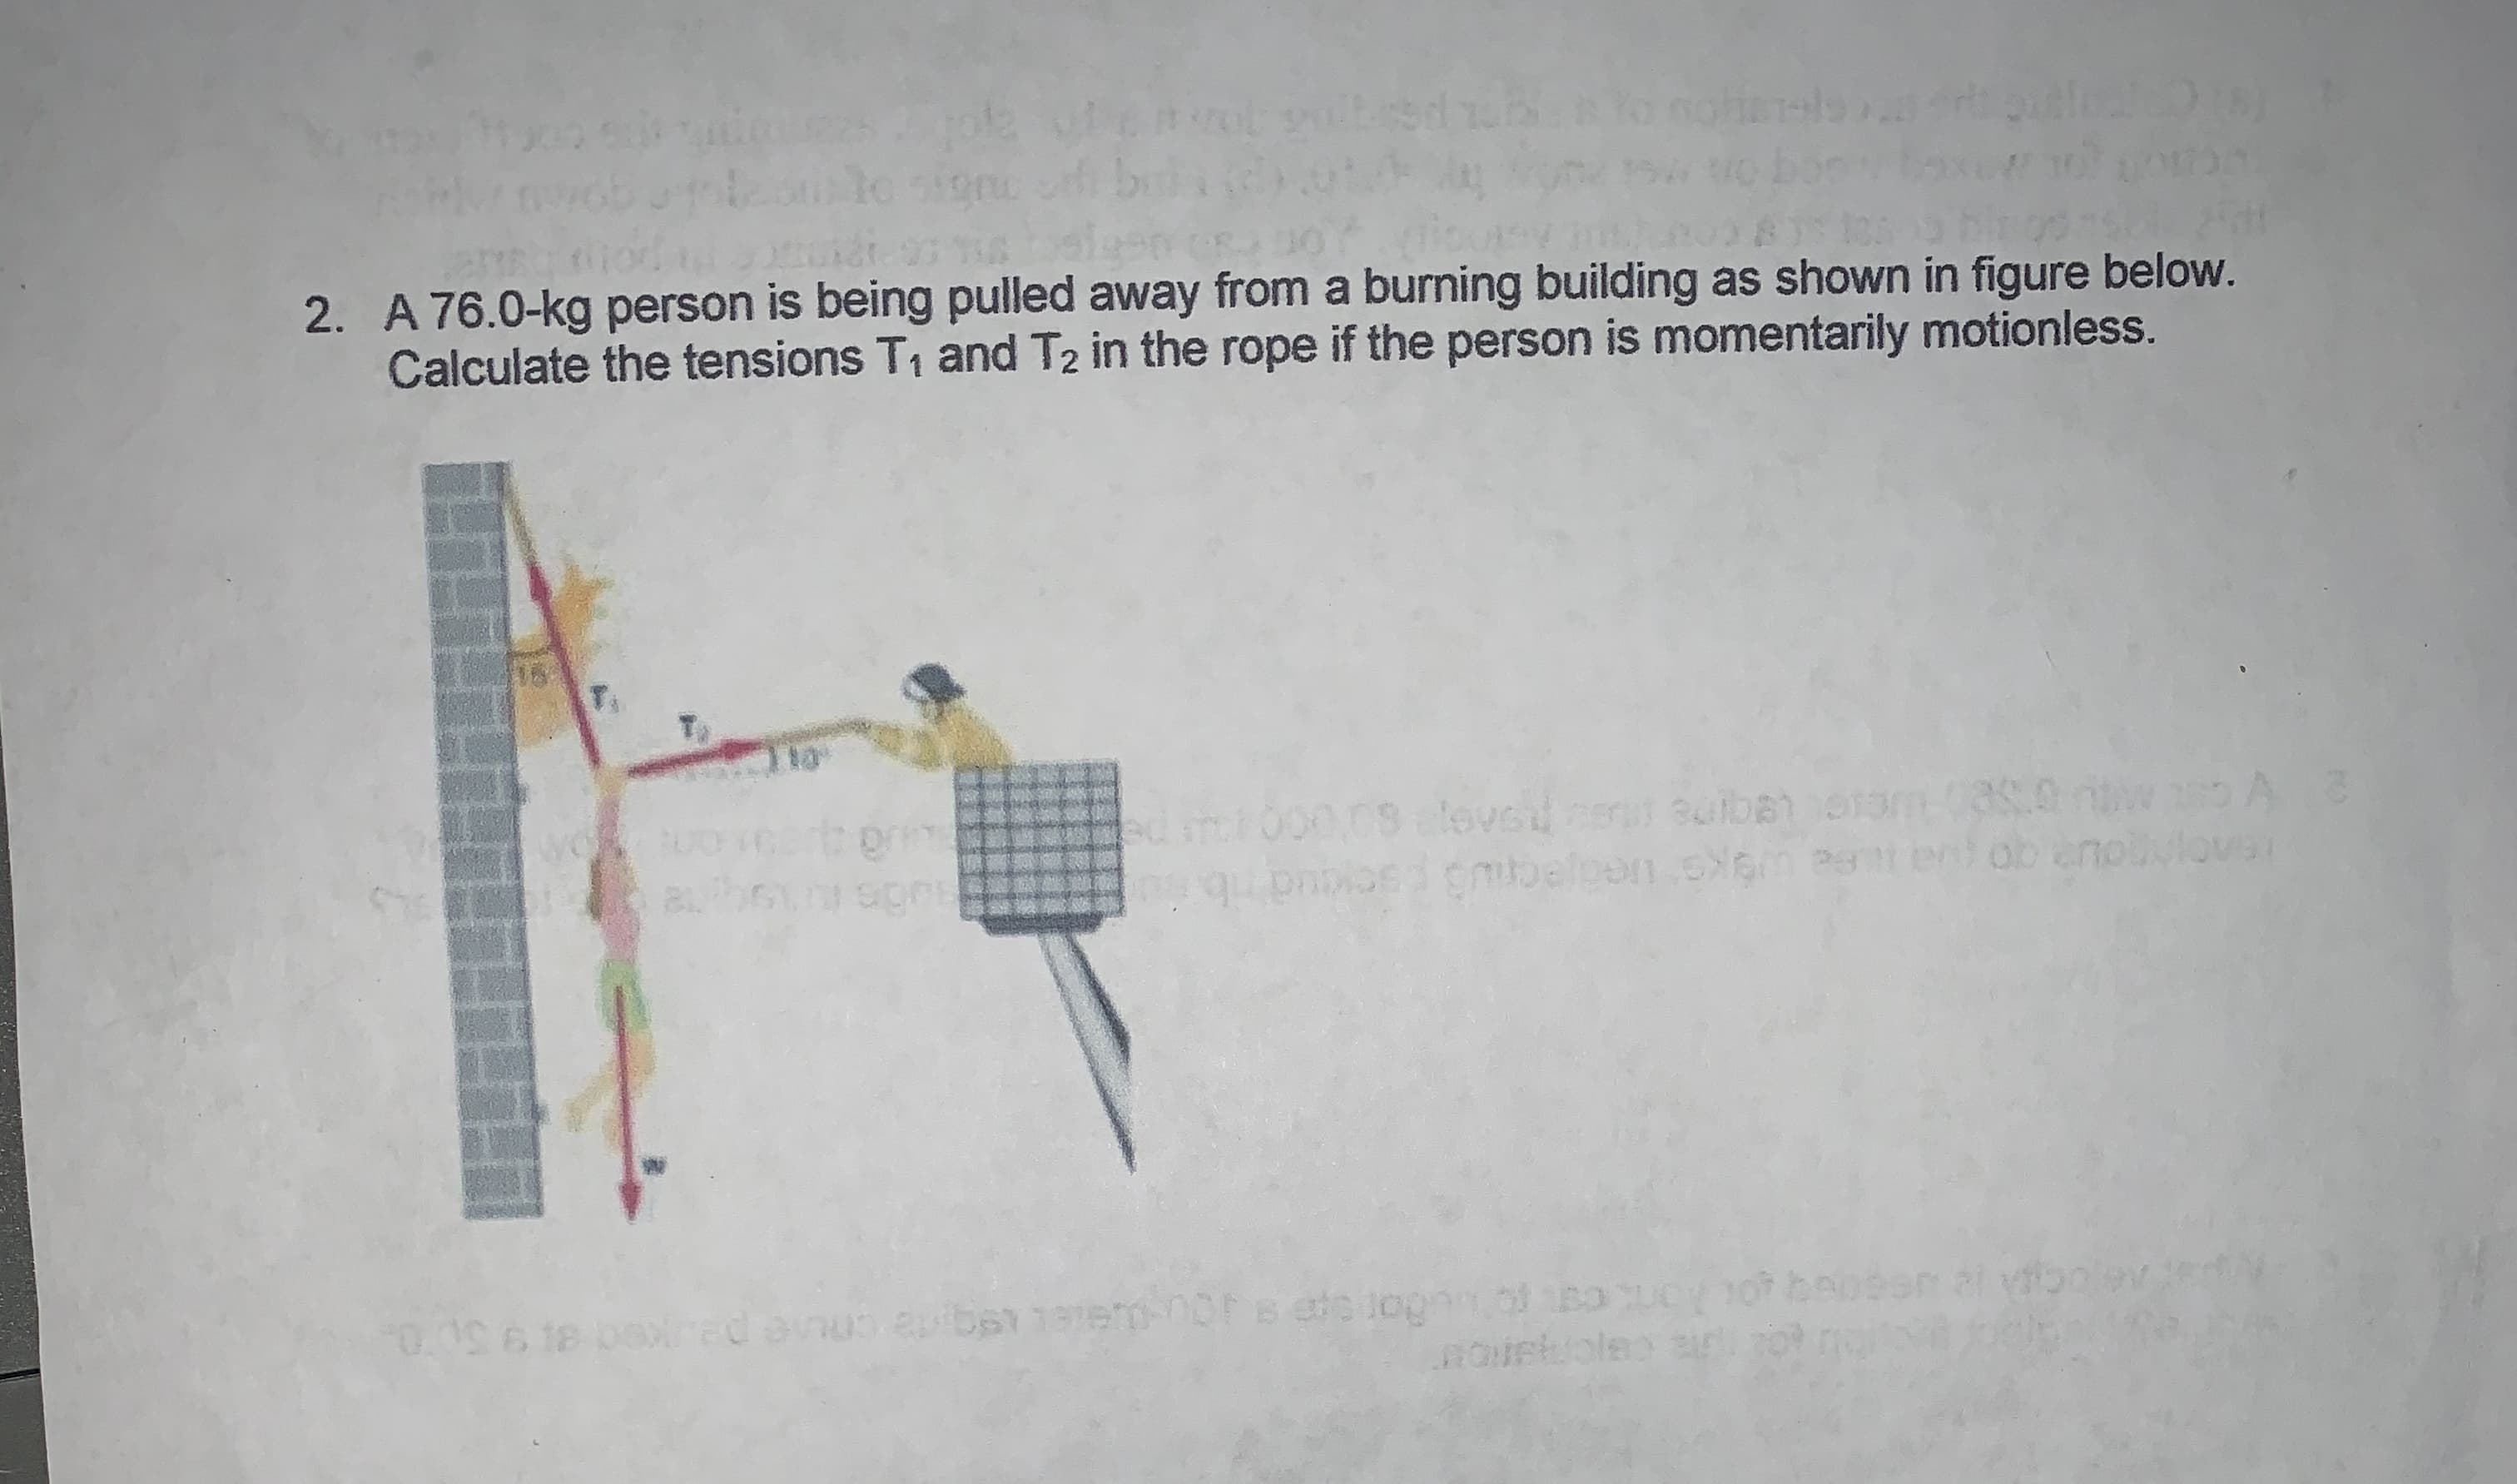 #o yolbese
2. A 76.0-kg person is being pulled away from a burning building as shown in figure below.
Calculate the tensions T1 and T2 in the rope if the person is momentarily motionless.
18
3s.0
enouvovs
e uigke iiedyeCnu cdud
000 09:16vsd
1 8S 0 1 A 3
3uiben
abounsgru
u apibas
(ed a9 3 0
oP
Beto jog U0!
.HOWGH
S7197
a: eur
